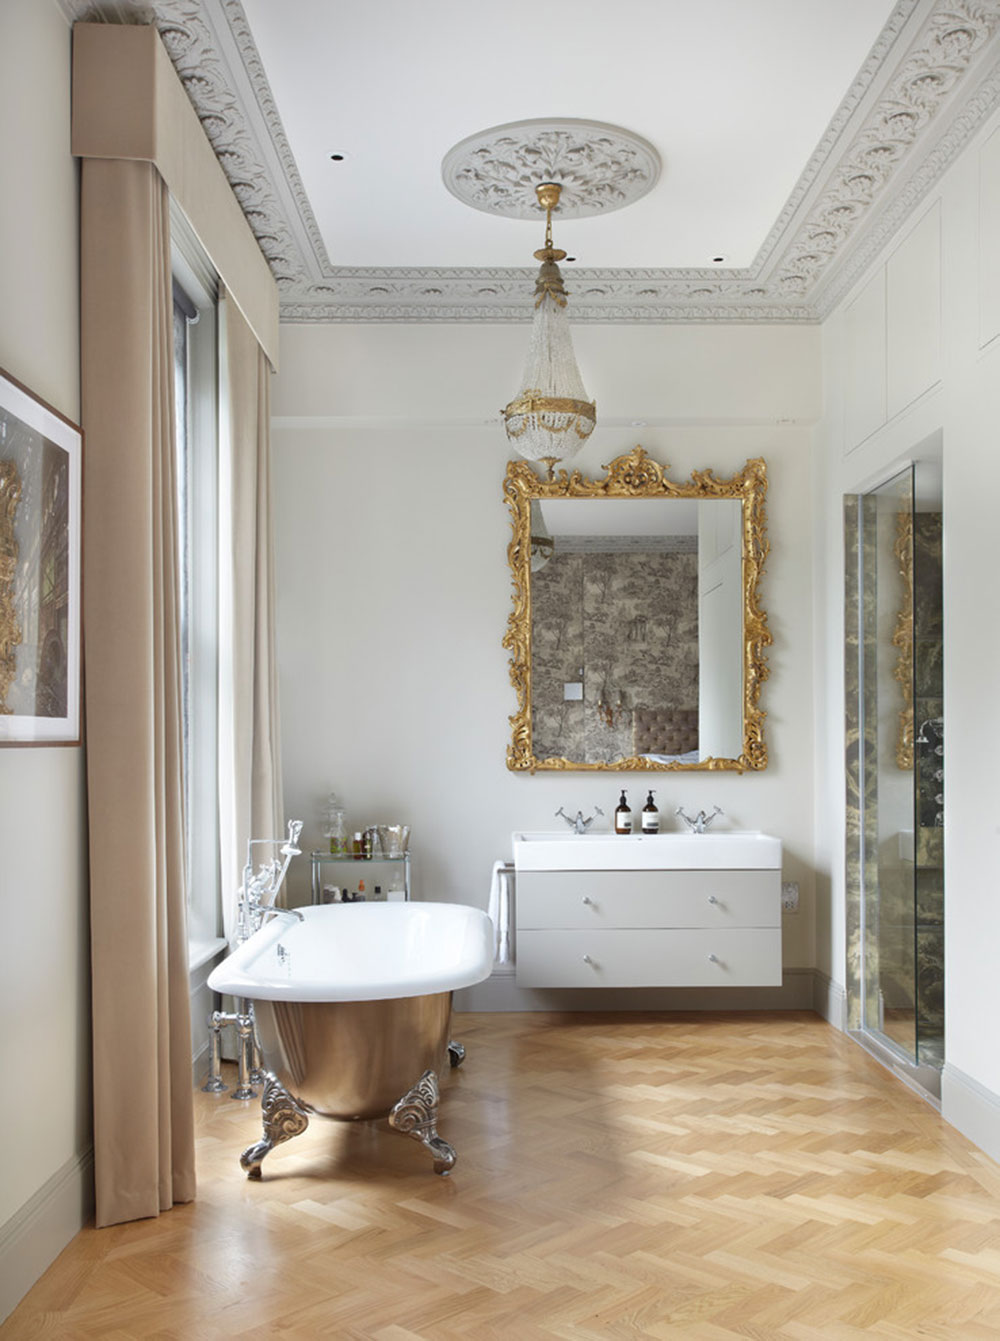 Drummonds-Case-Study-London-Townhouse-Maida-Vale-by-Drummonds-Bathrooms Vintage bathroom decor you could try in your home